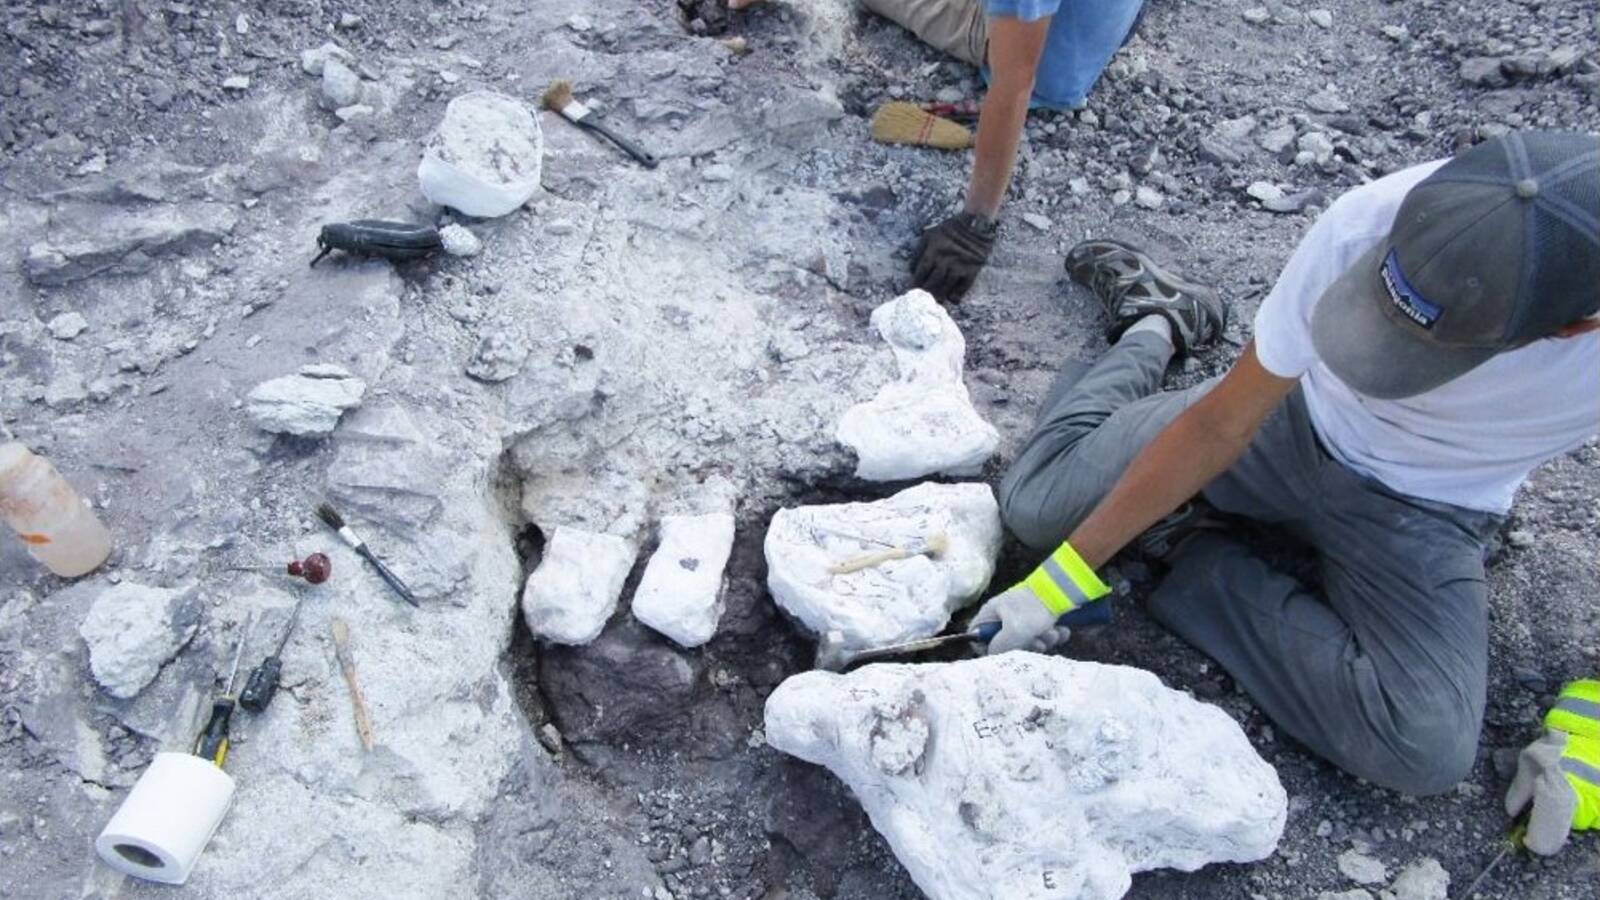 <p>Paleontologists work to extract reptile bones from the Dying Grounds in 2014. Toilet paper-lined plaster "jackets" encase the fragile fossils so they can be safely removed from the field and taken to the lab.</p>